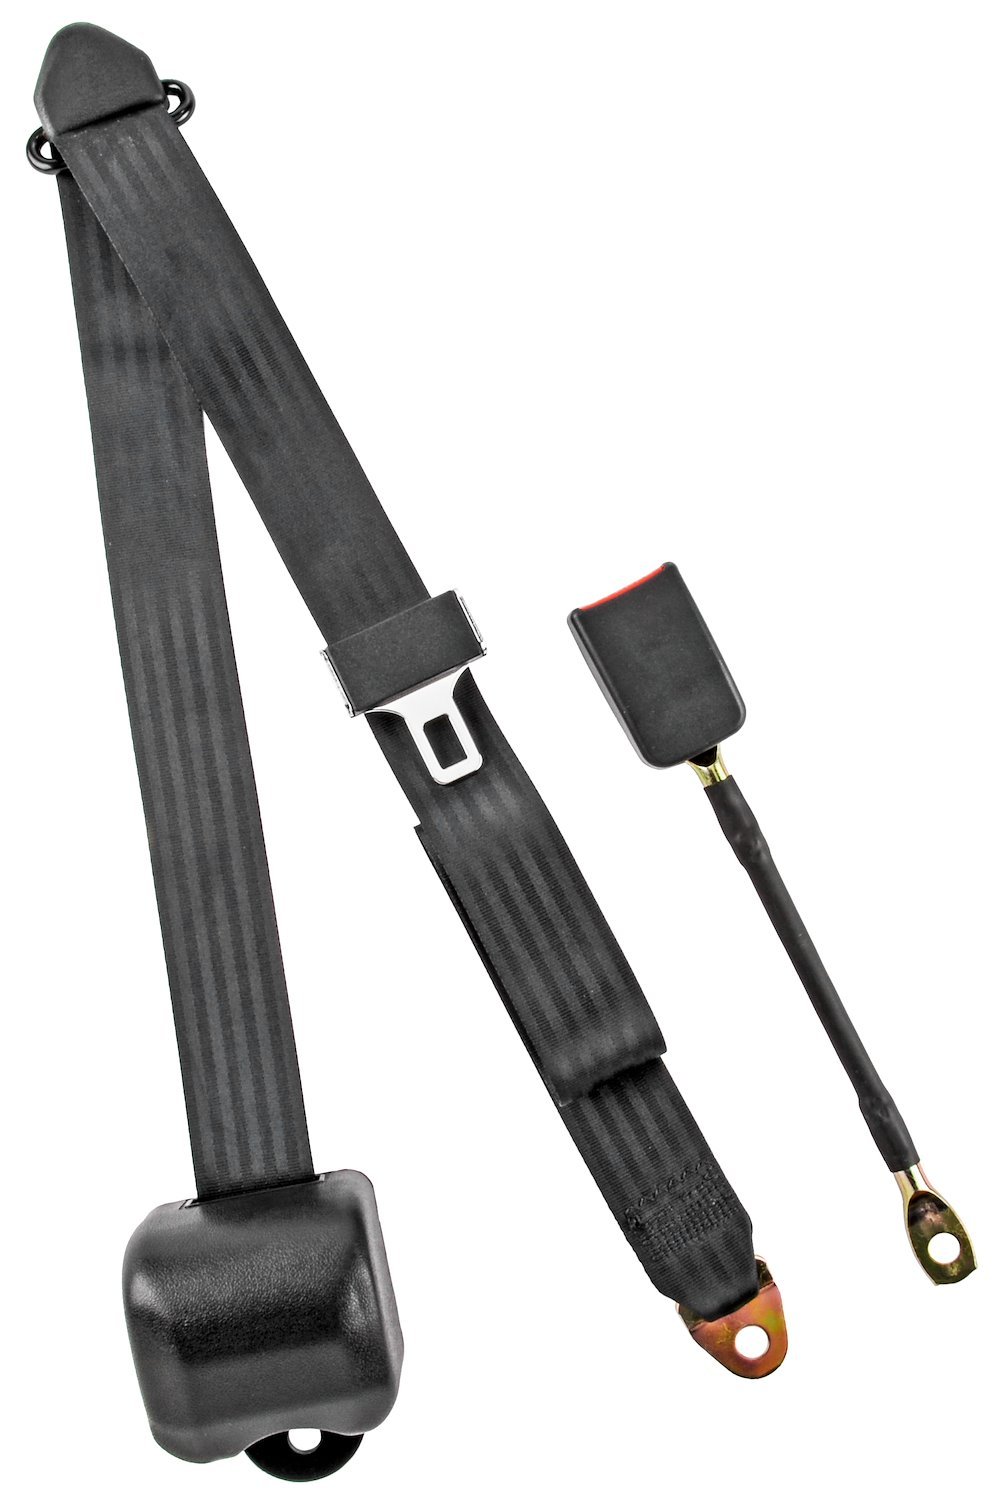 3-Point Retractable Seat Belt, Black with Euro End-Button Latch [Sleeve/Cable Length: 12 in.]